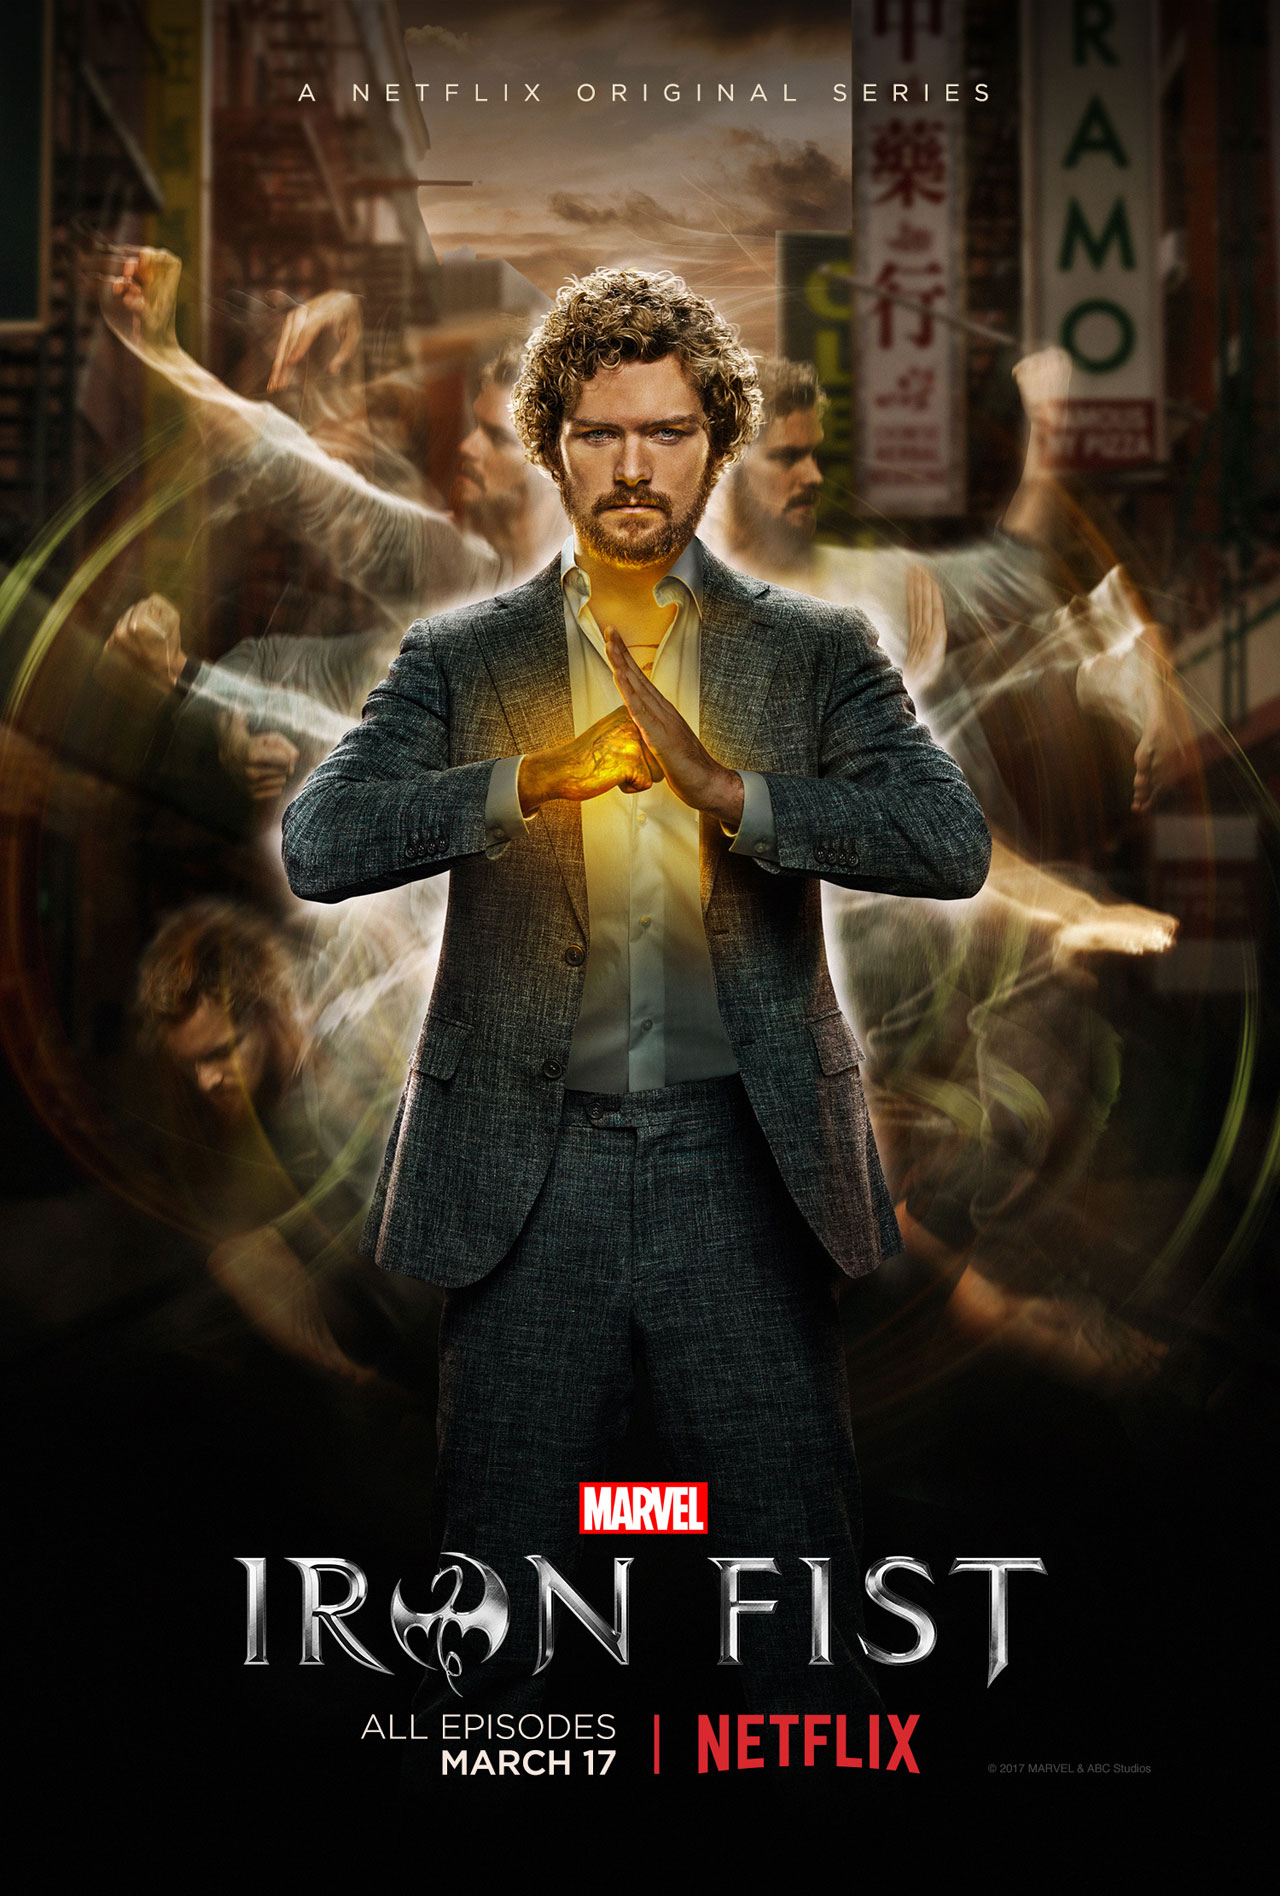 Image result for iron fist netflix poster